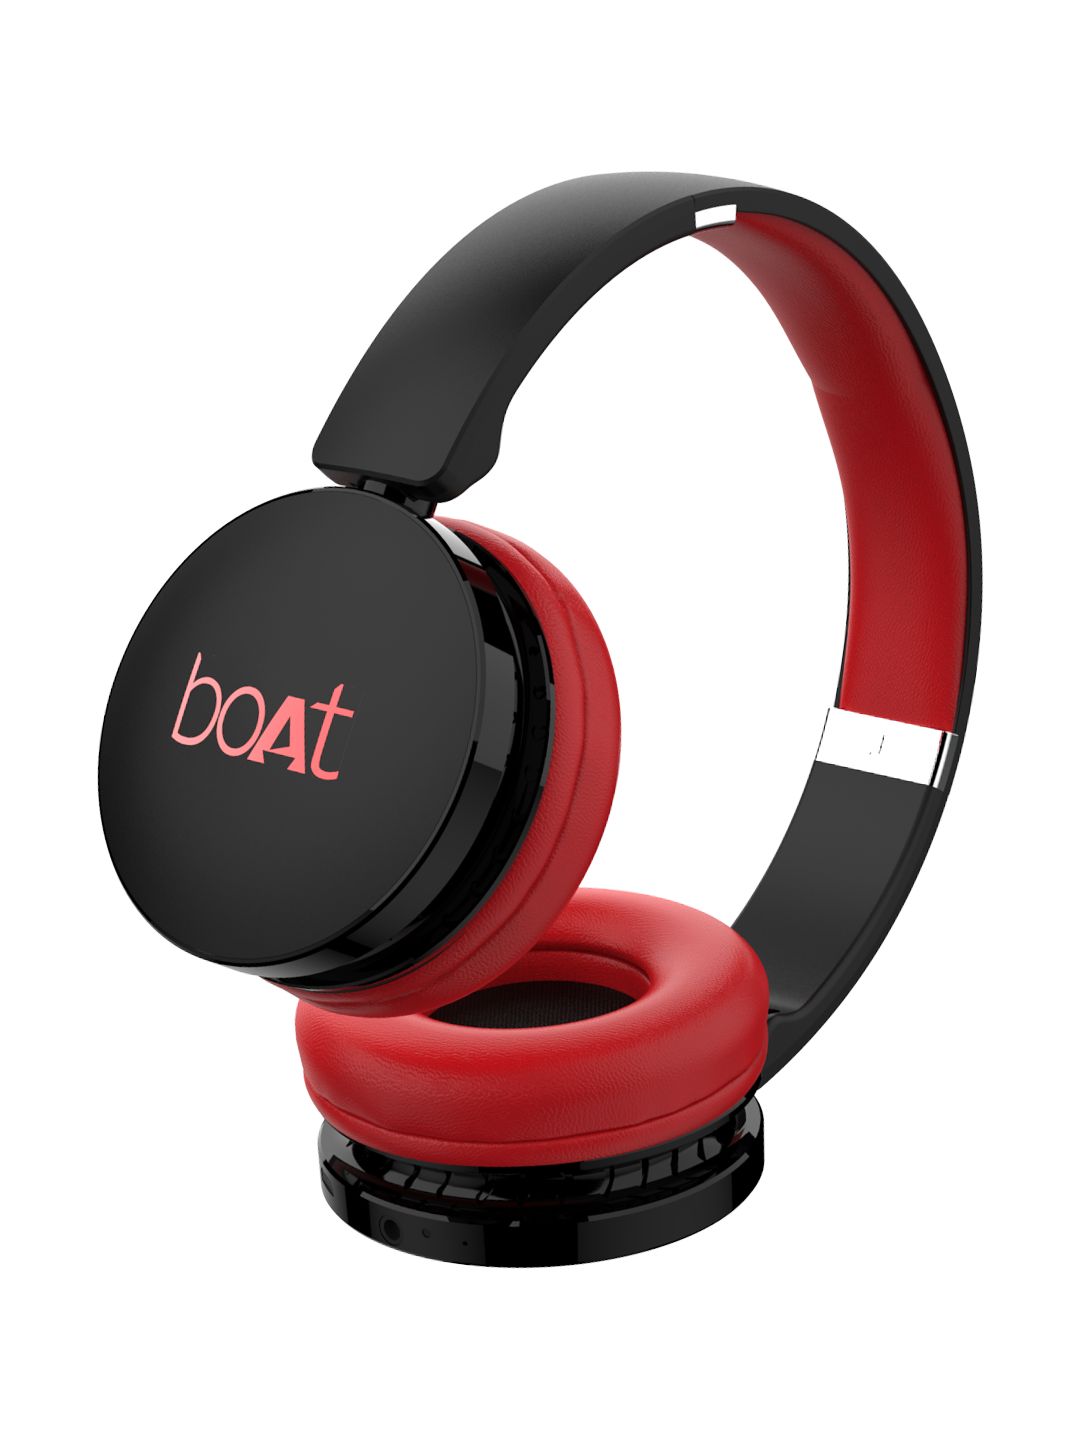 boAt Rockerz 370 Fiery Red Wireless Headphone with Immersive Audio Padded Earcups Price in India